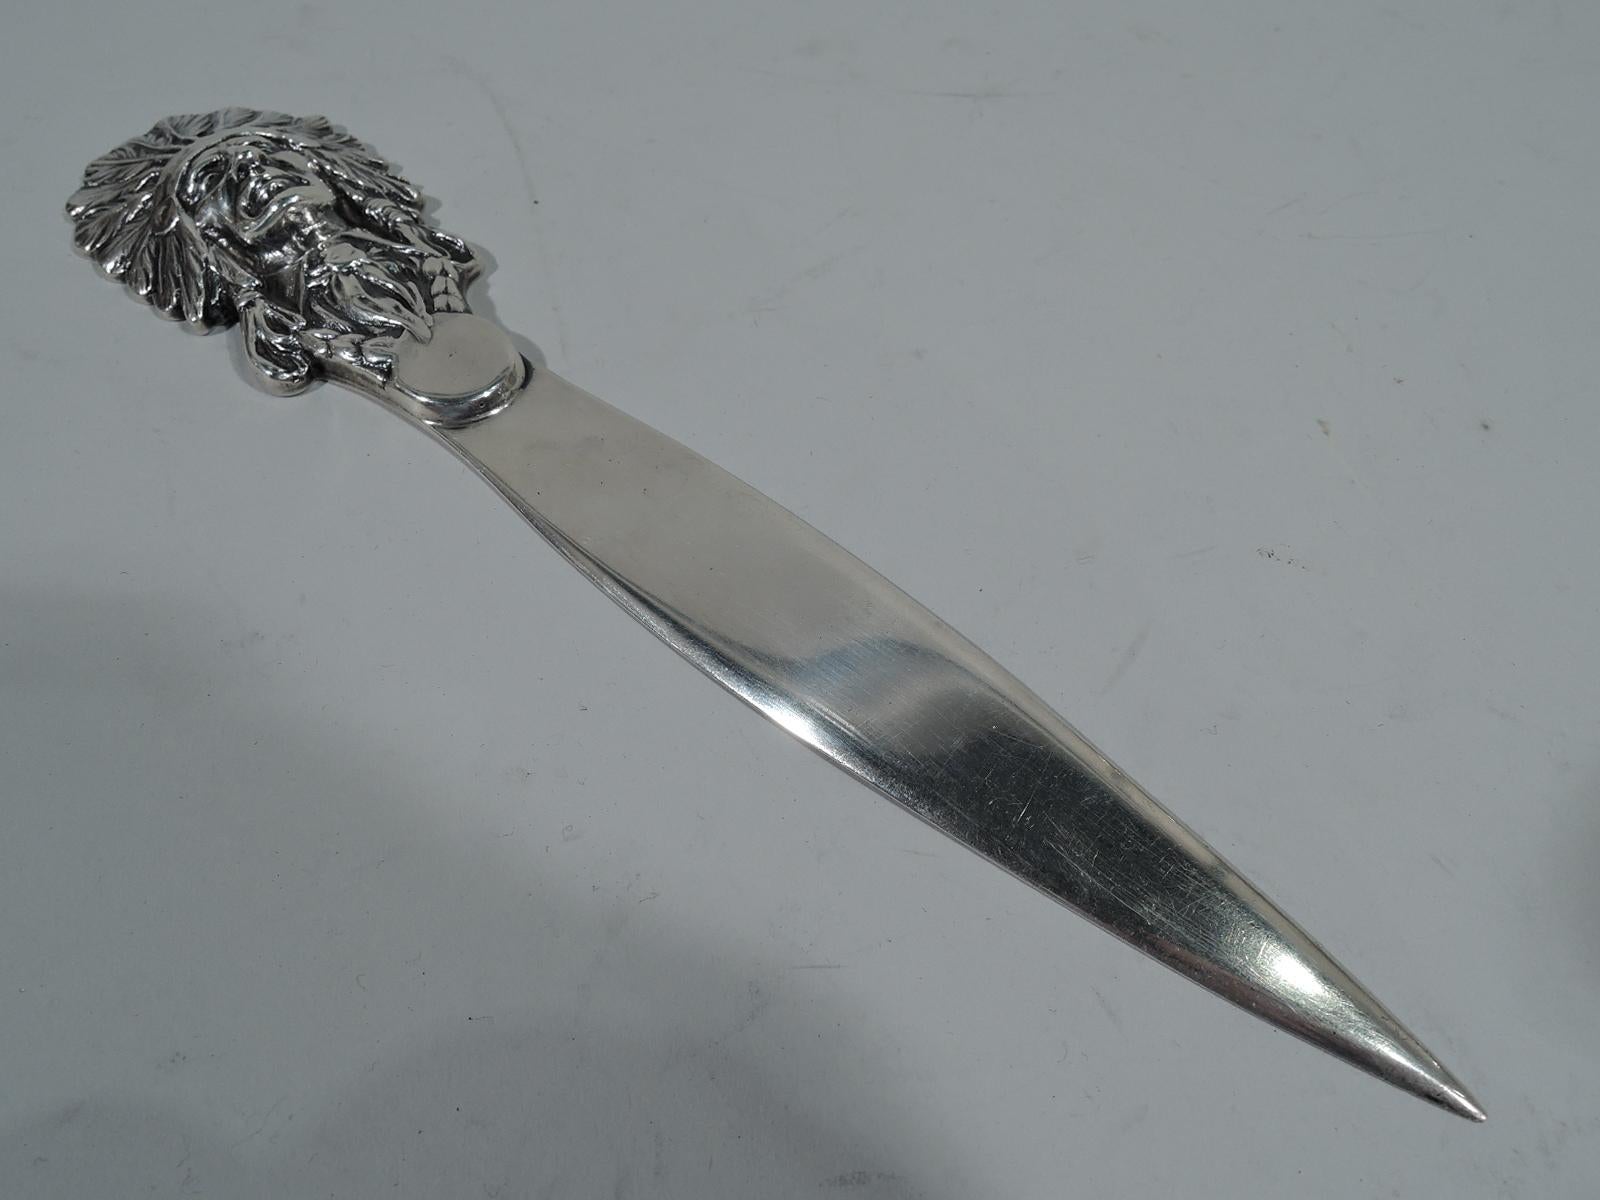 Antique sterling silver letter opener. Cast terminal in form of Indian chief with feathered headdress and intense, gaunt face. A nice piece of turn-of-the-century Native Americana. Hallmarked “Sterling 97”. Strong definition. Weight: 6.4 troy ounces.